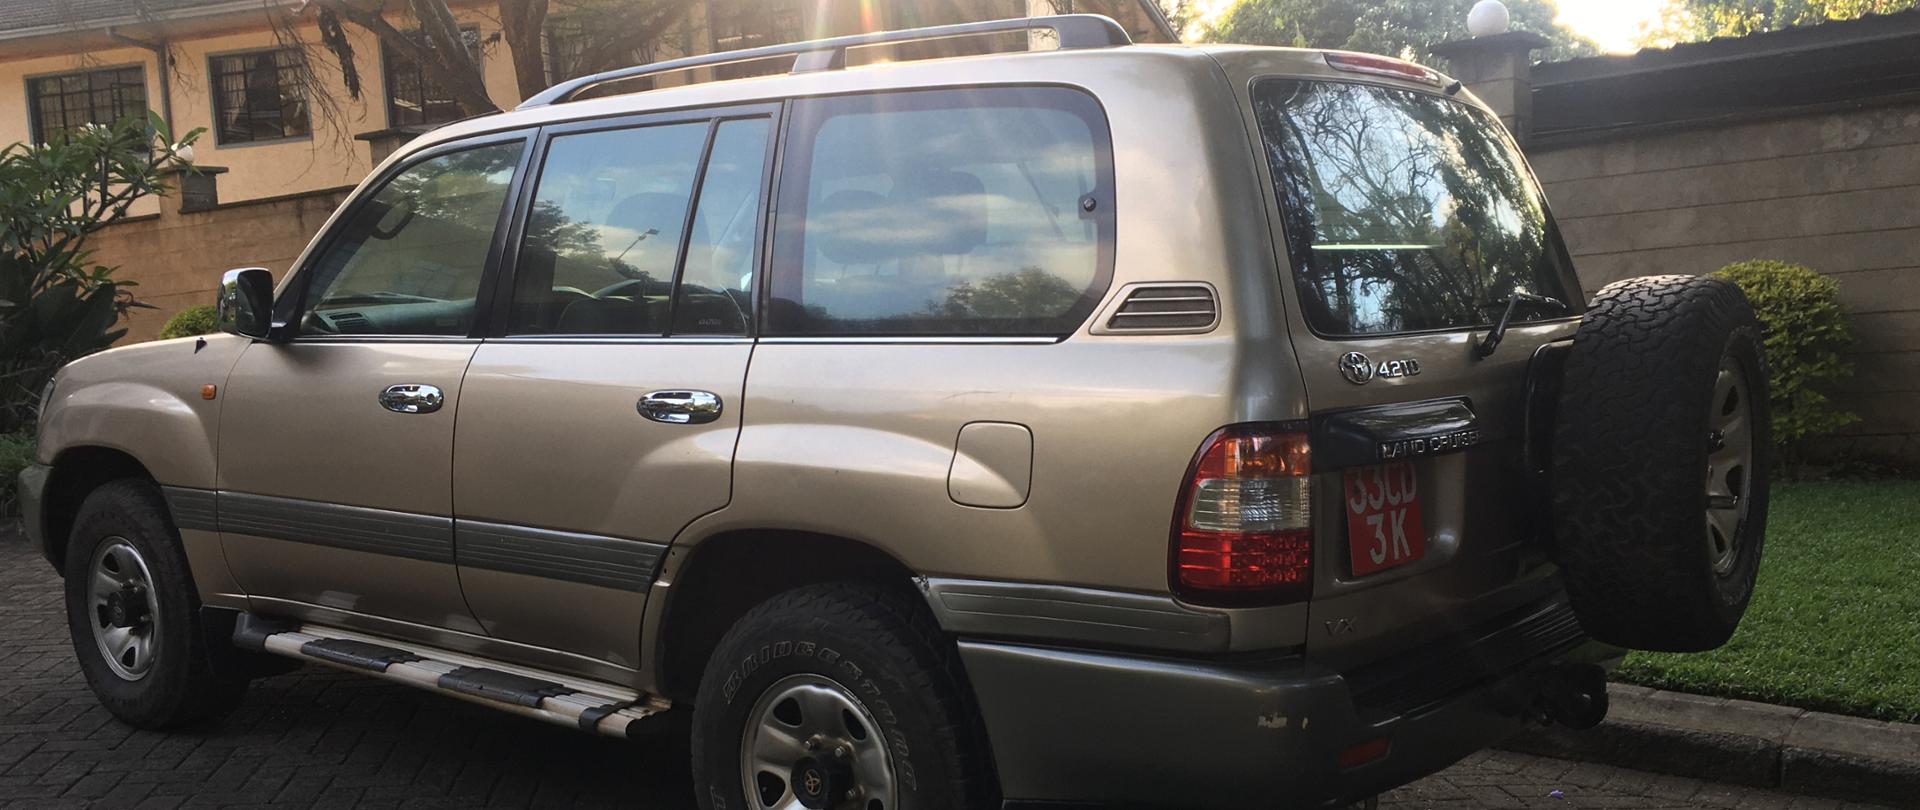 Toyota Land Cruiser VX for sale by Embassy of the Republic of Poland in Nairobi